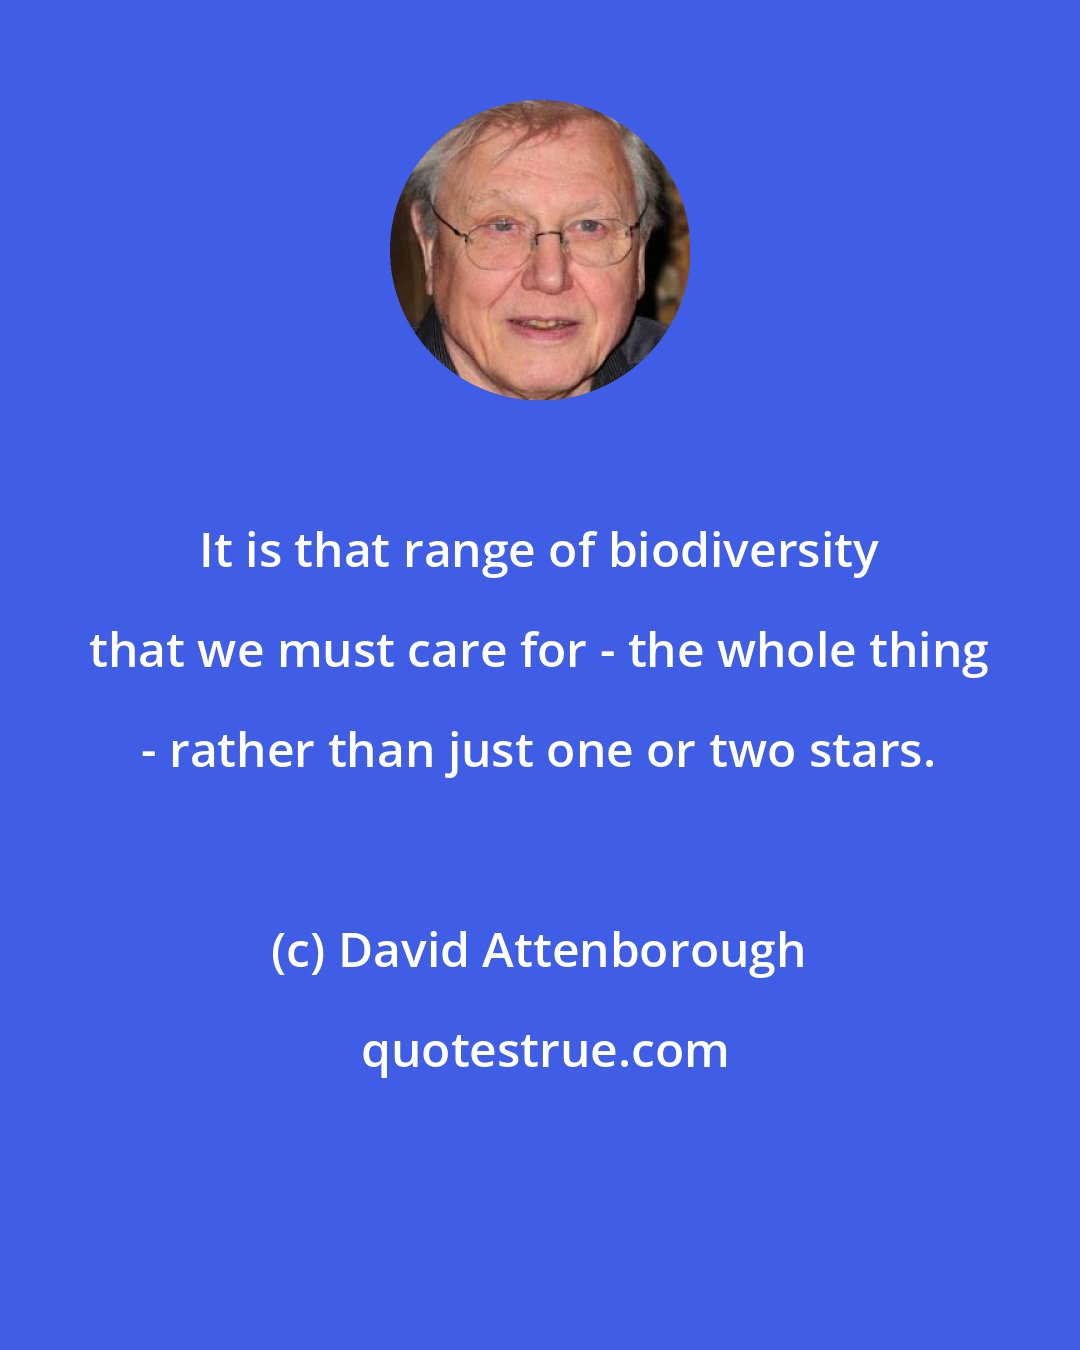 David Attenborough: It is that range of biodiversity that we must care for - the whole thing - rather than just one or two stars.